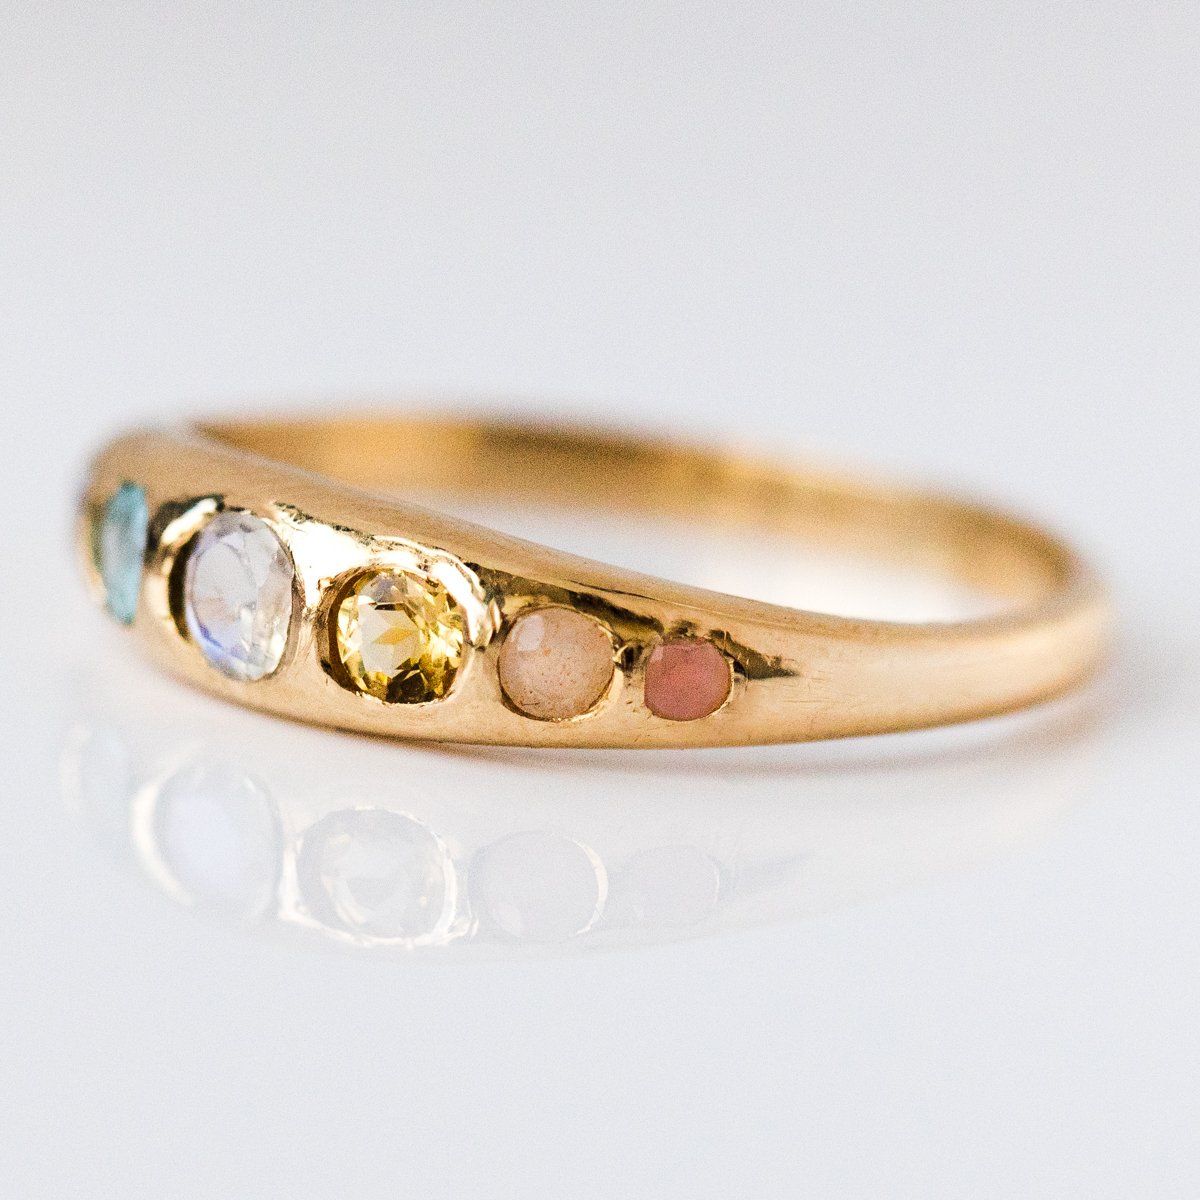 She's an Artist Ring in Yellow Gold - rings - I Like it Here Club local eclectic